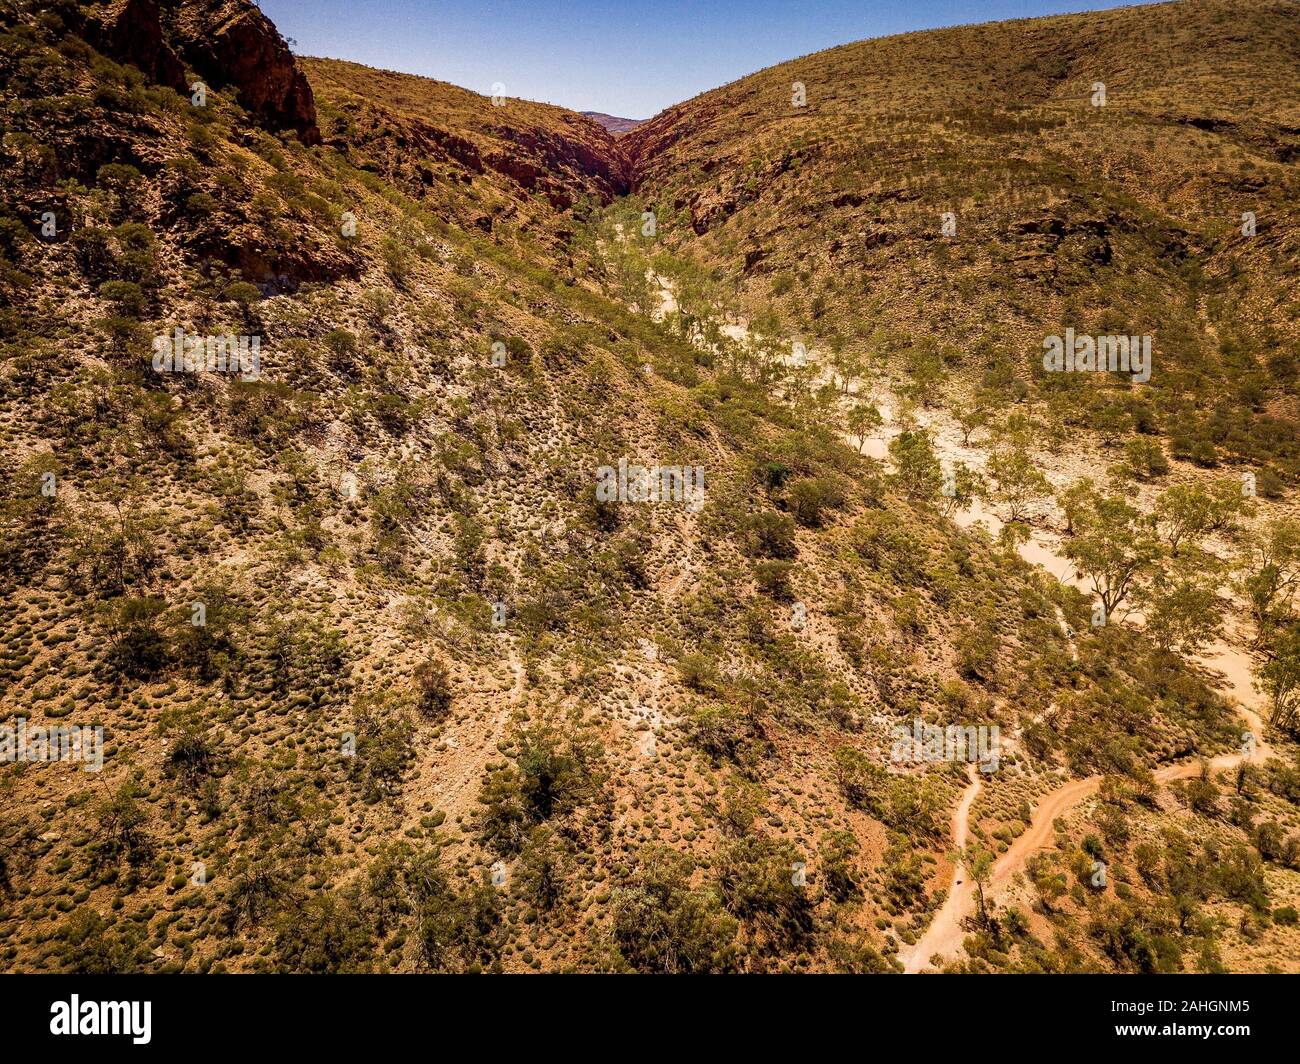 The walking track that leads to the dry creek bed at Redbank Gorge in the West MacDonnell Ranges, Northern Territory, Australia Stock Photo